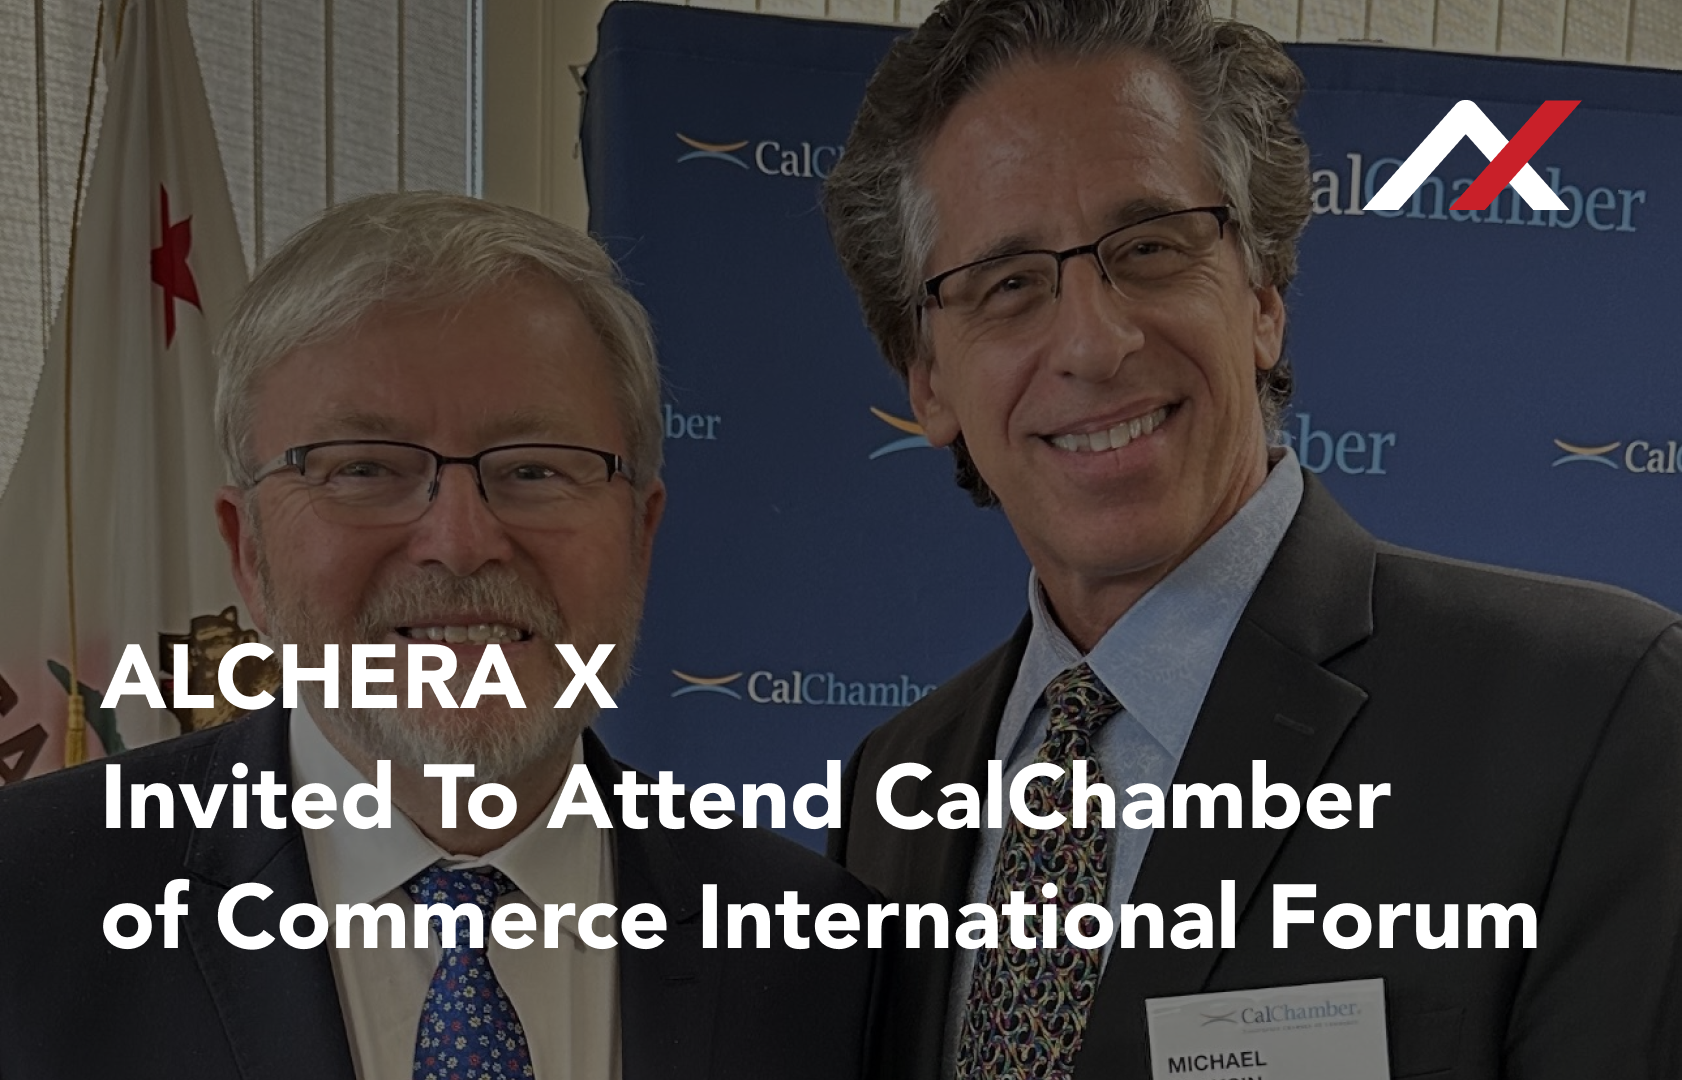 Alchera X Invited To Attend CalChamber of Commerce International Forum & Reception for the Honorable Dr. Kevin Rudd, Australia’s Ambassador to the United States